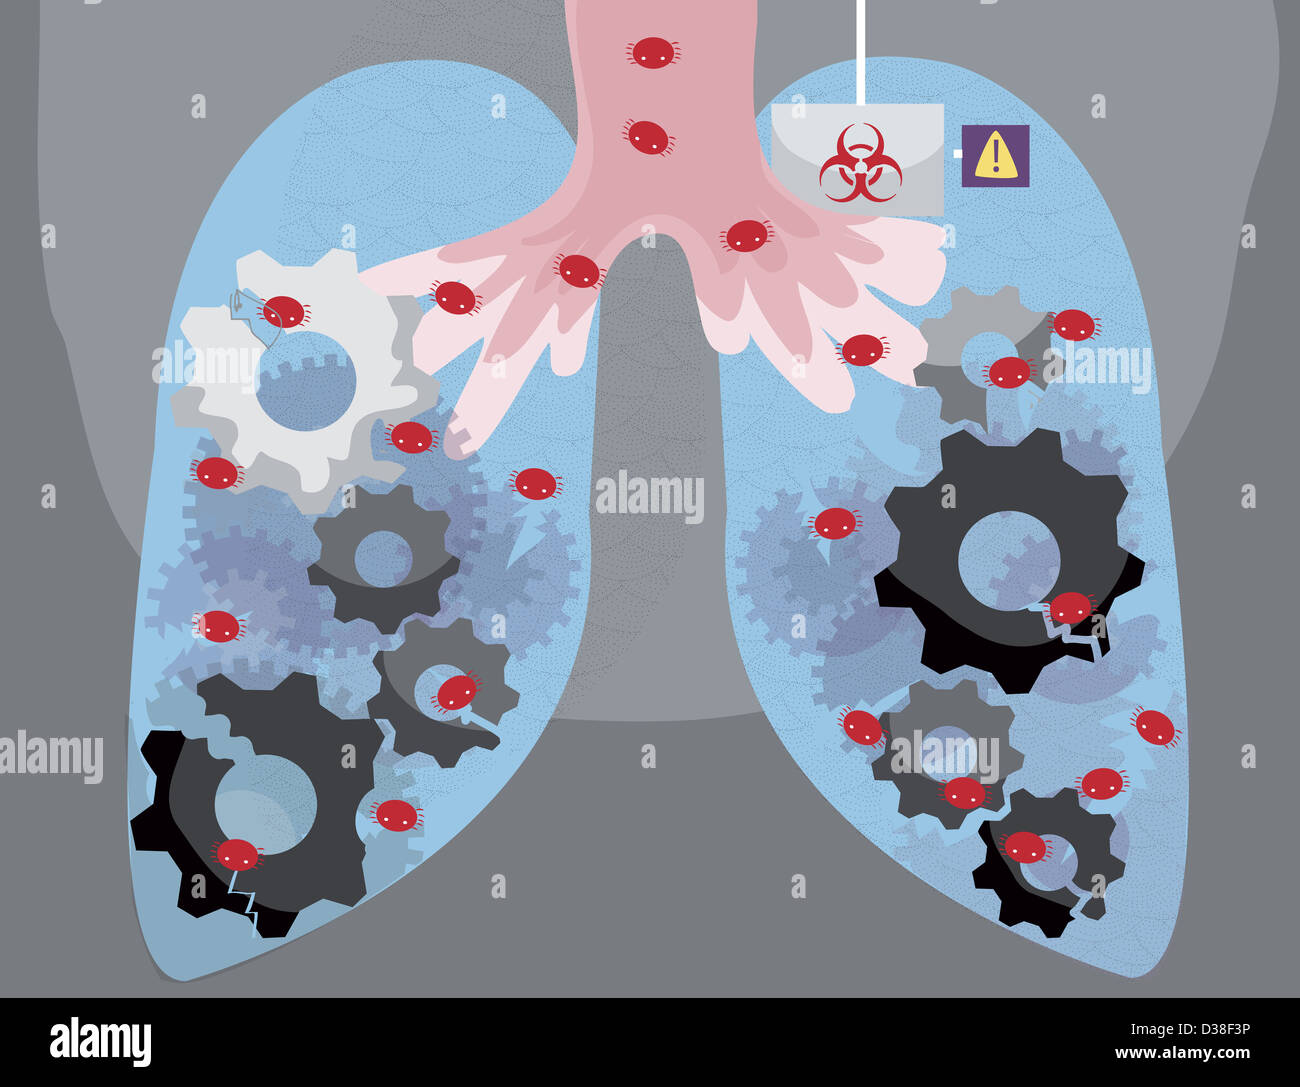 Illustrative image of human lungs infected by virus Stock Photo